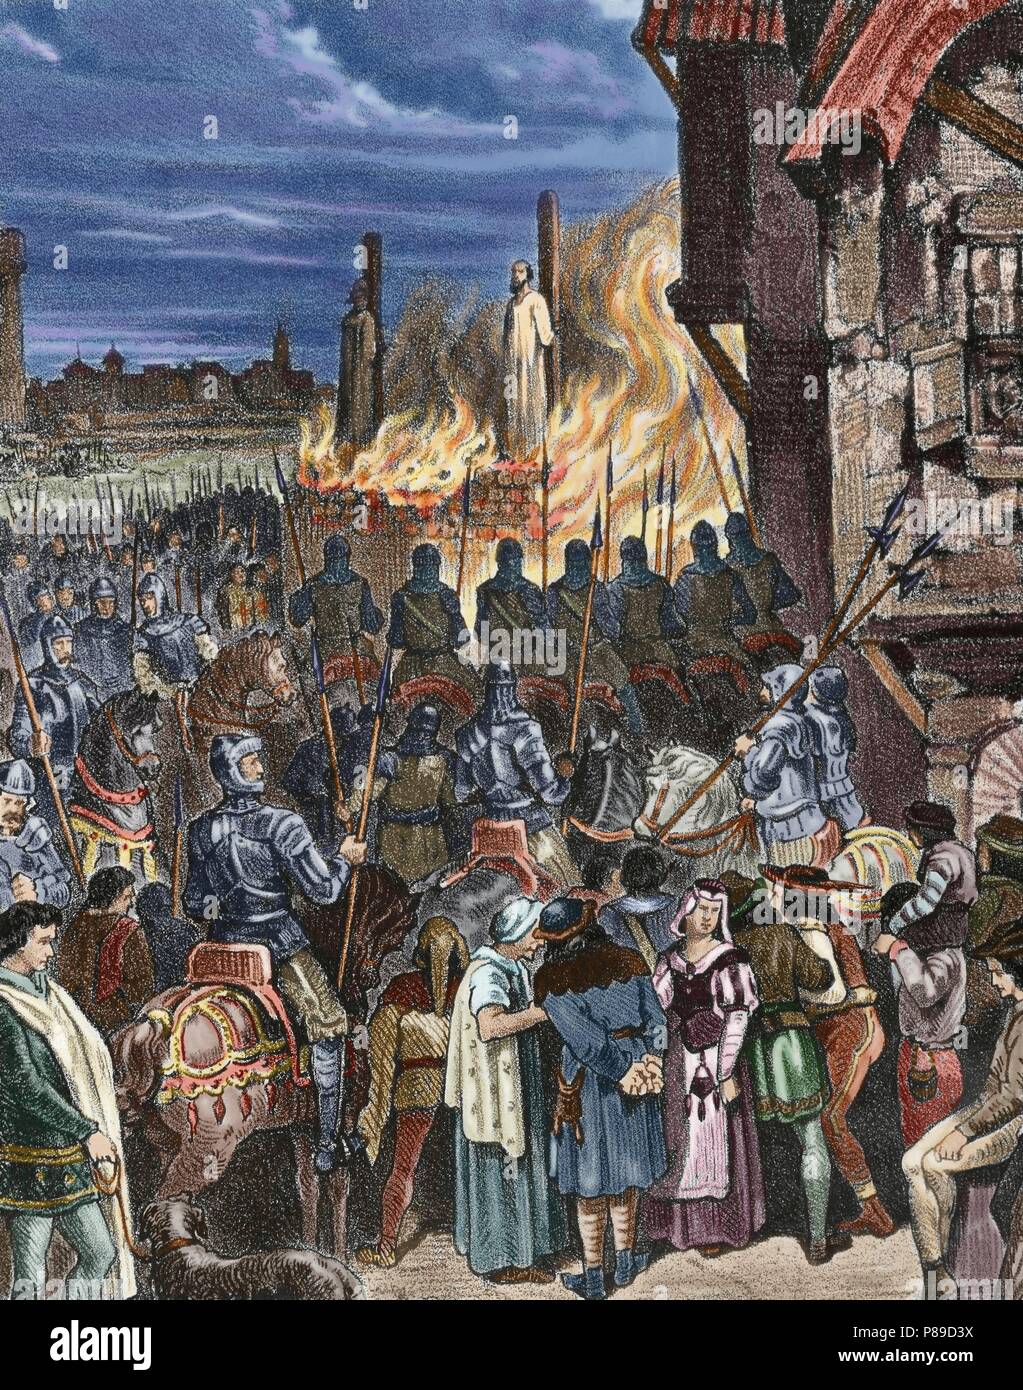 Burning of the Templars in France. Paris. Jacques de Molay (c.1240-1244-1314), Grand Master of the Order of the Temple, and Geoffroi de Charney, preceptor in Normandy, are burned at the stake accused of heresy by Pope Clement V March 18, 1314. Engraving. Colored. Stock Photo